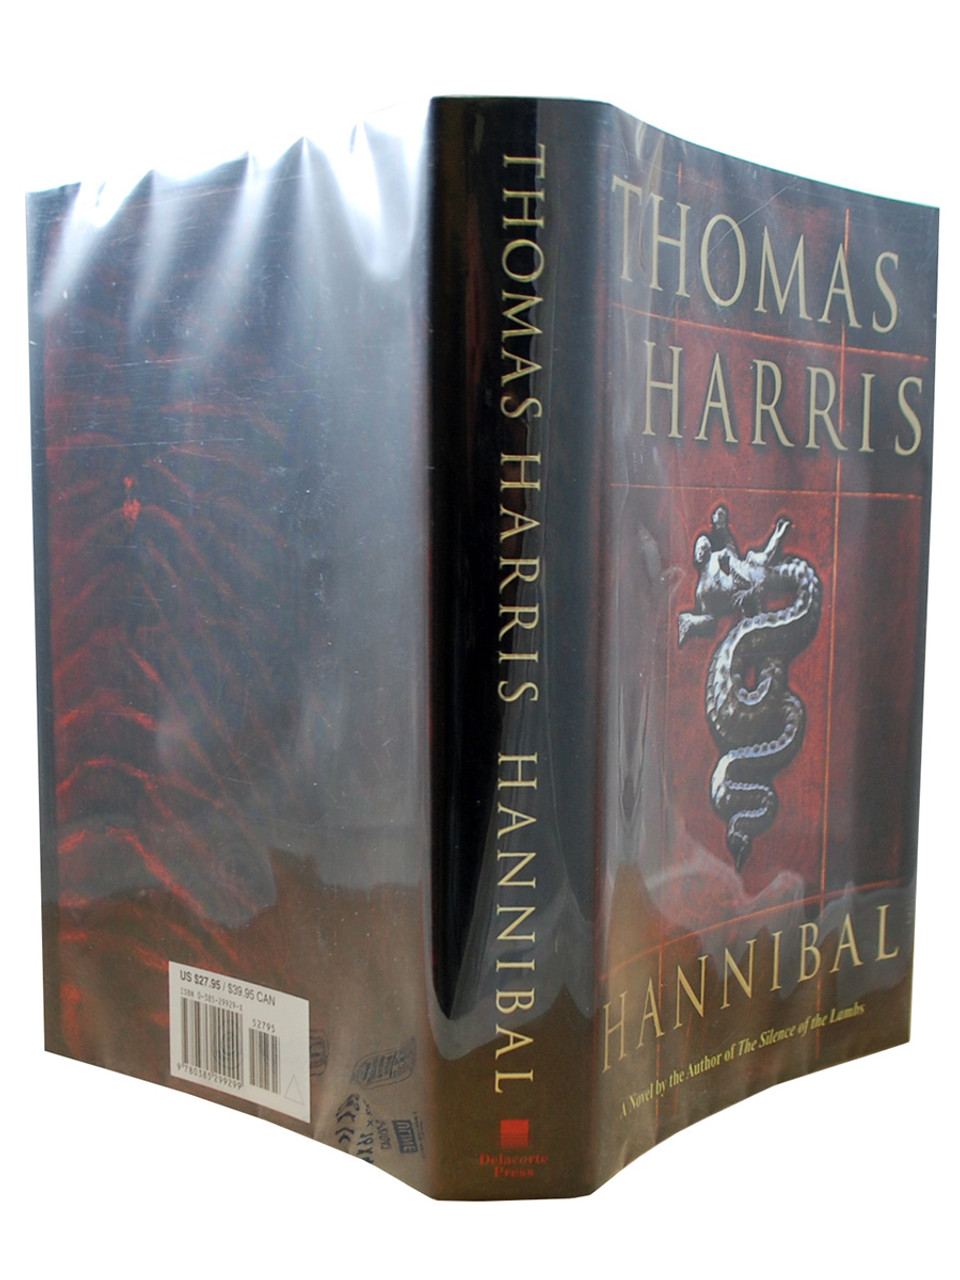 Thomas Harris "Hannibal" Signed First Edition, First Printing w/COA  [Very Fine]